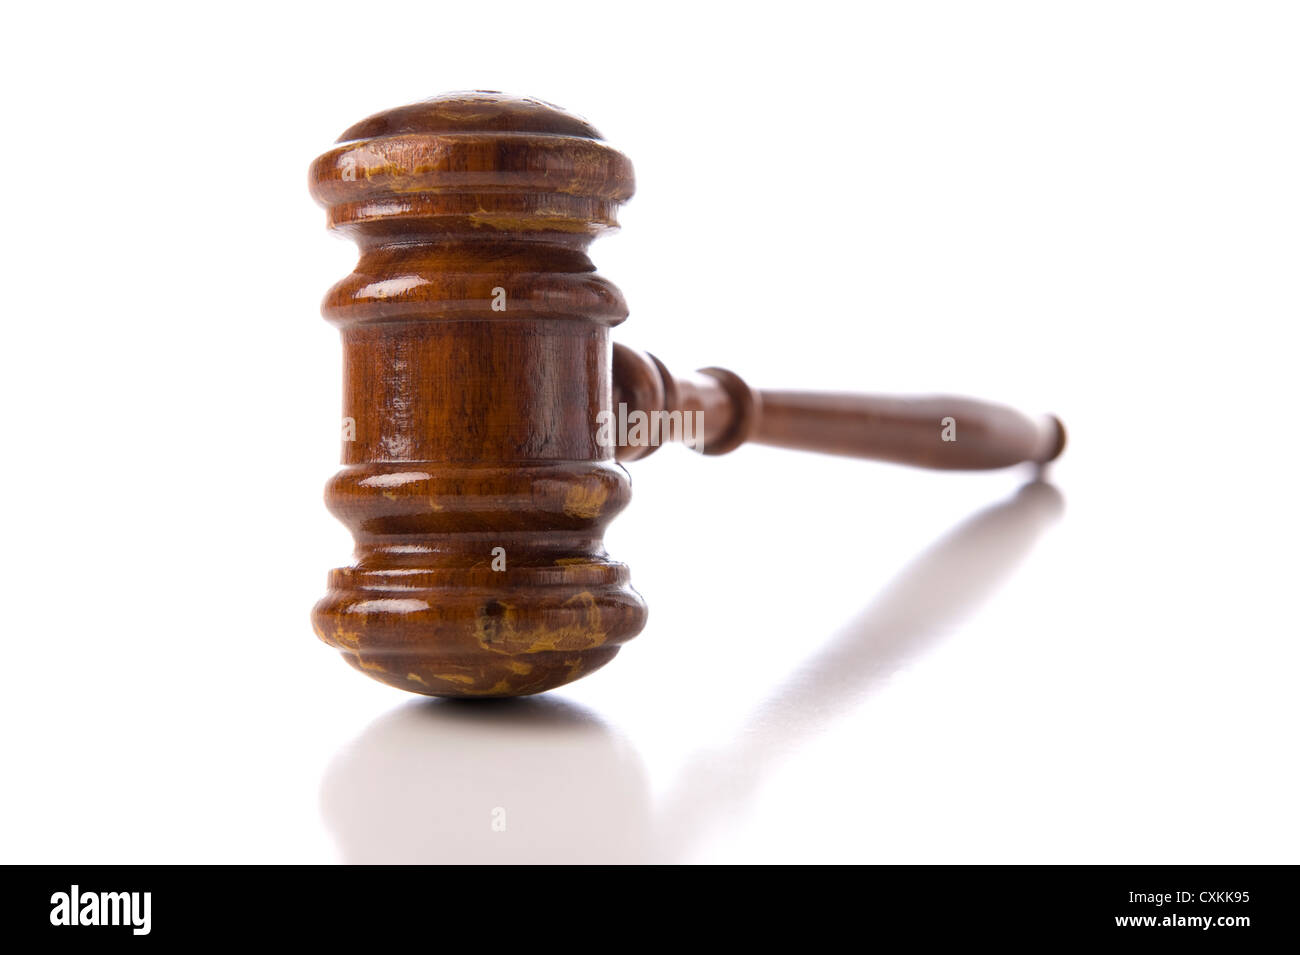 A judges wooden gavel on a white background Stock Photo